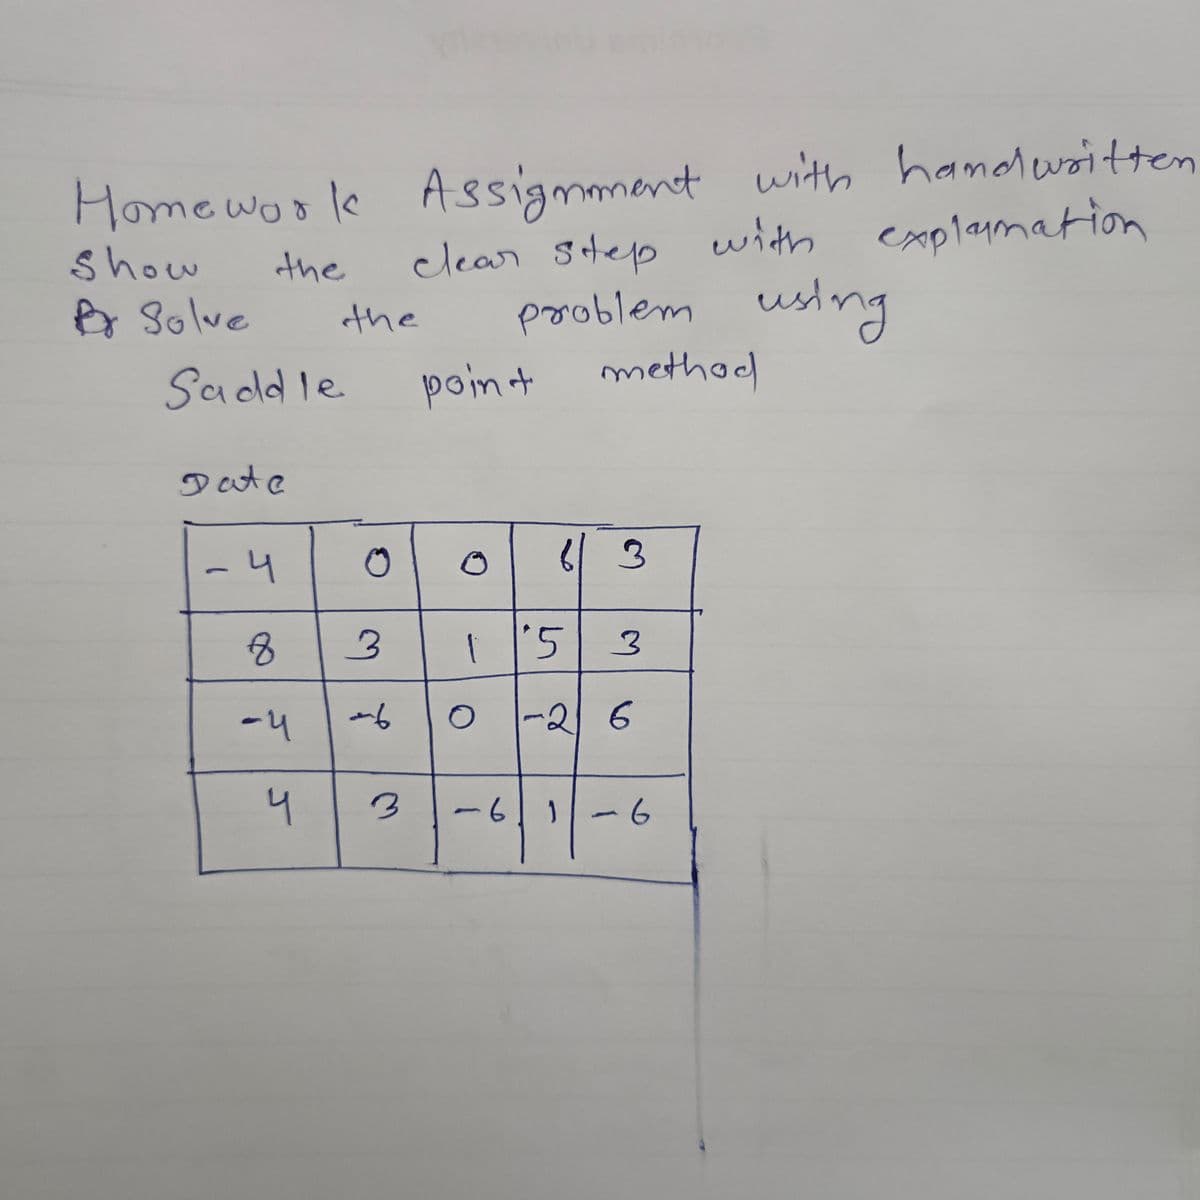 Homeworle Assigmment with hamdwritten
clear step with explamation
using
Show
the
A Solve
pooblem
method
the
Saddle
point
Date
4
6 3
1 15
-4
-216
4
-6
1
9-
